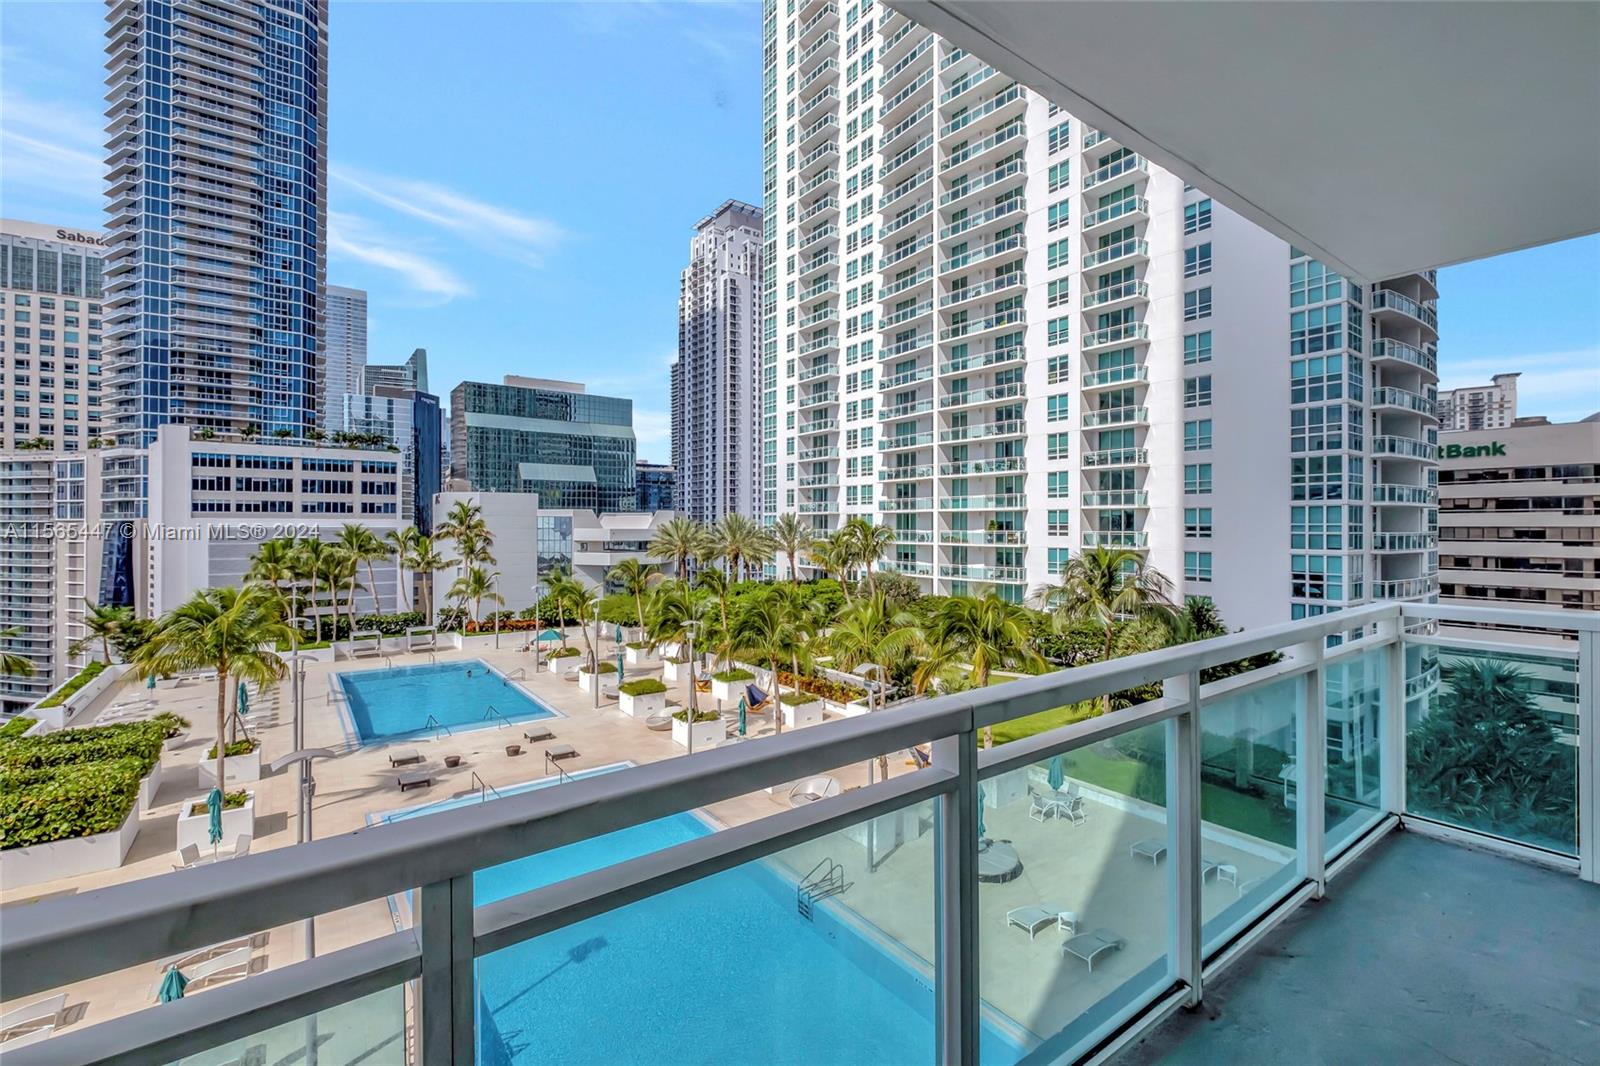 Enjoy this gorgeous 1bd/1bath unit located at the PLAZA on BRICKELL with amazing view from the 16th fl, facing towards swimming pool and center of Brickell from the big and confortable balcony. Basic cable and internet . ENJOY all the amenities and feel like you are in a luxury hotel. The building is in prime location and within a short distance from Mary Brickell Village, Brickell City Centre, an endless list of restaurants and center of recreation, cultural and universities.
Location couldn't be better, you can walk or take free transportation several miles around.